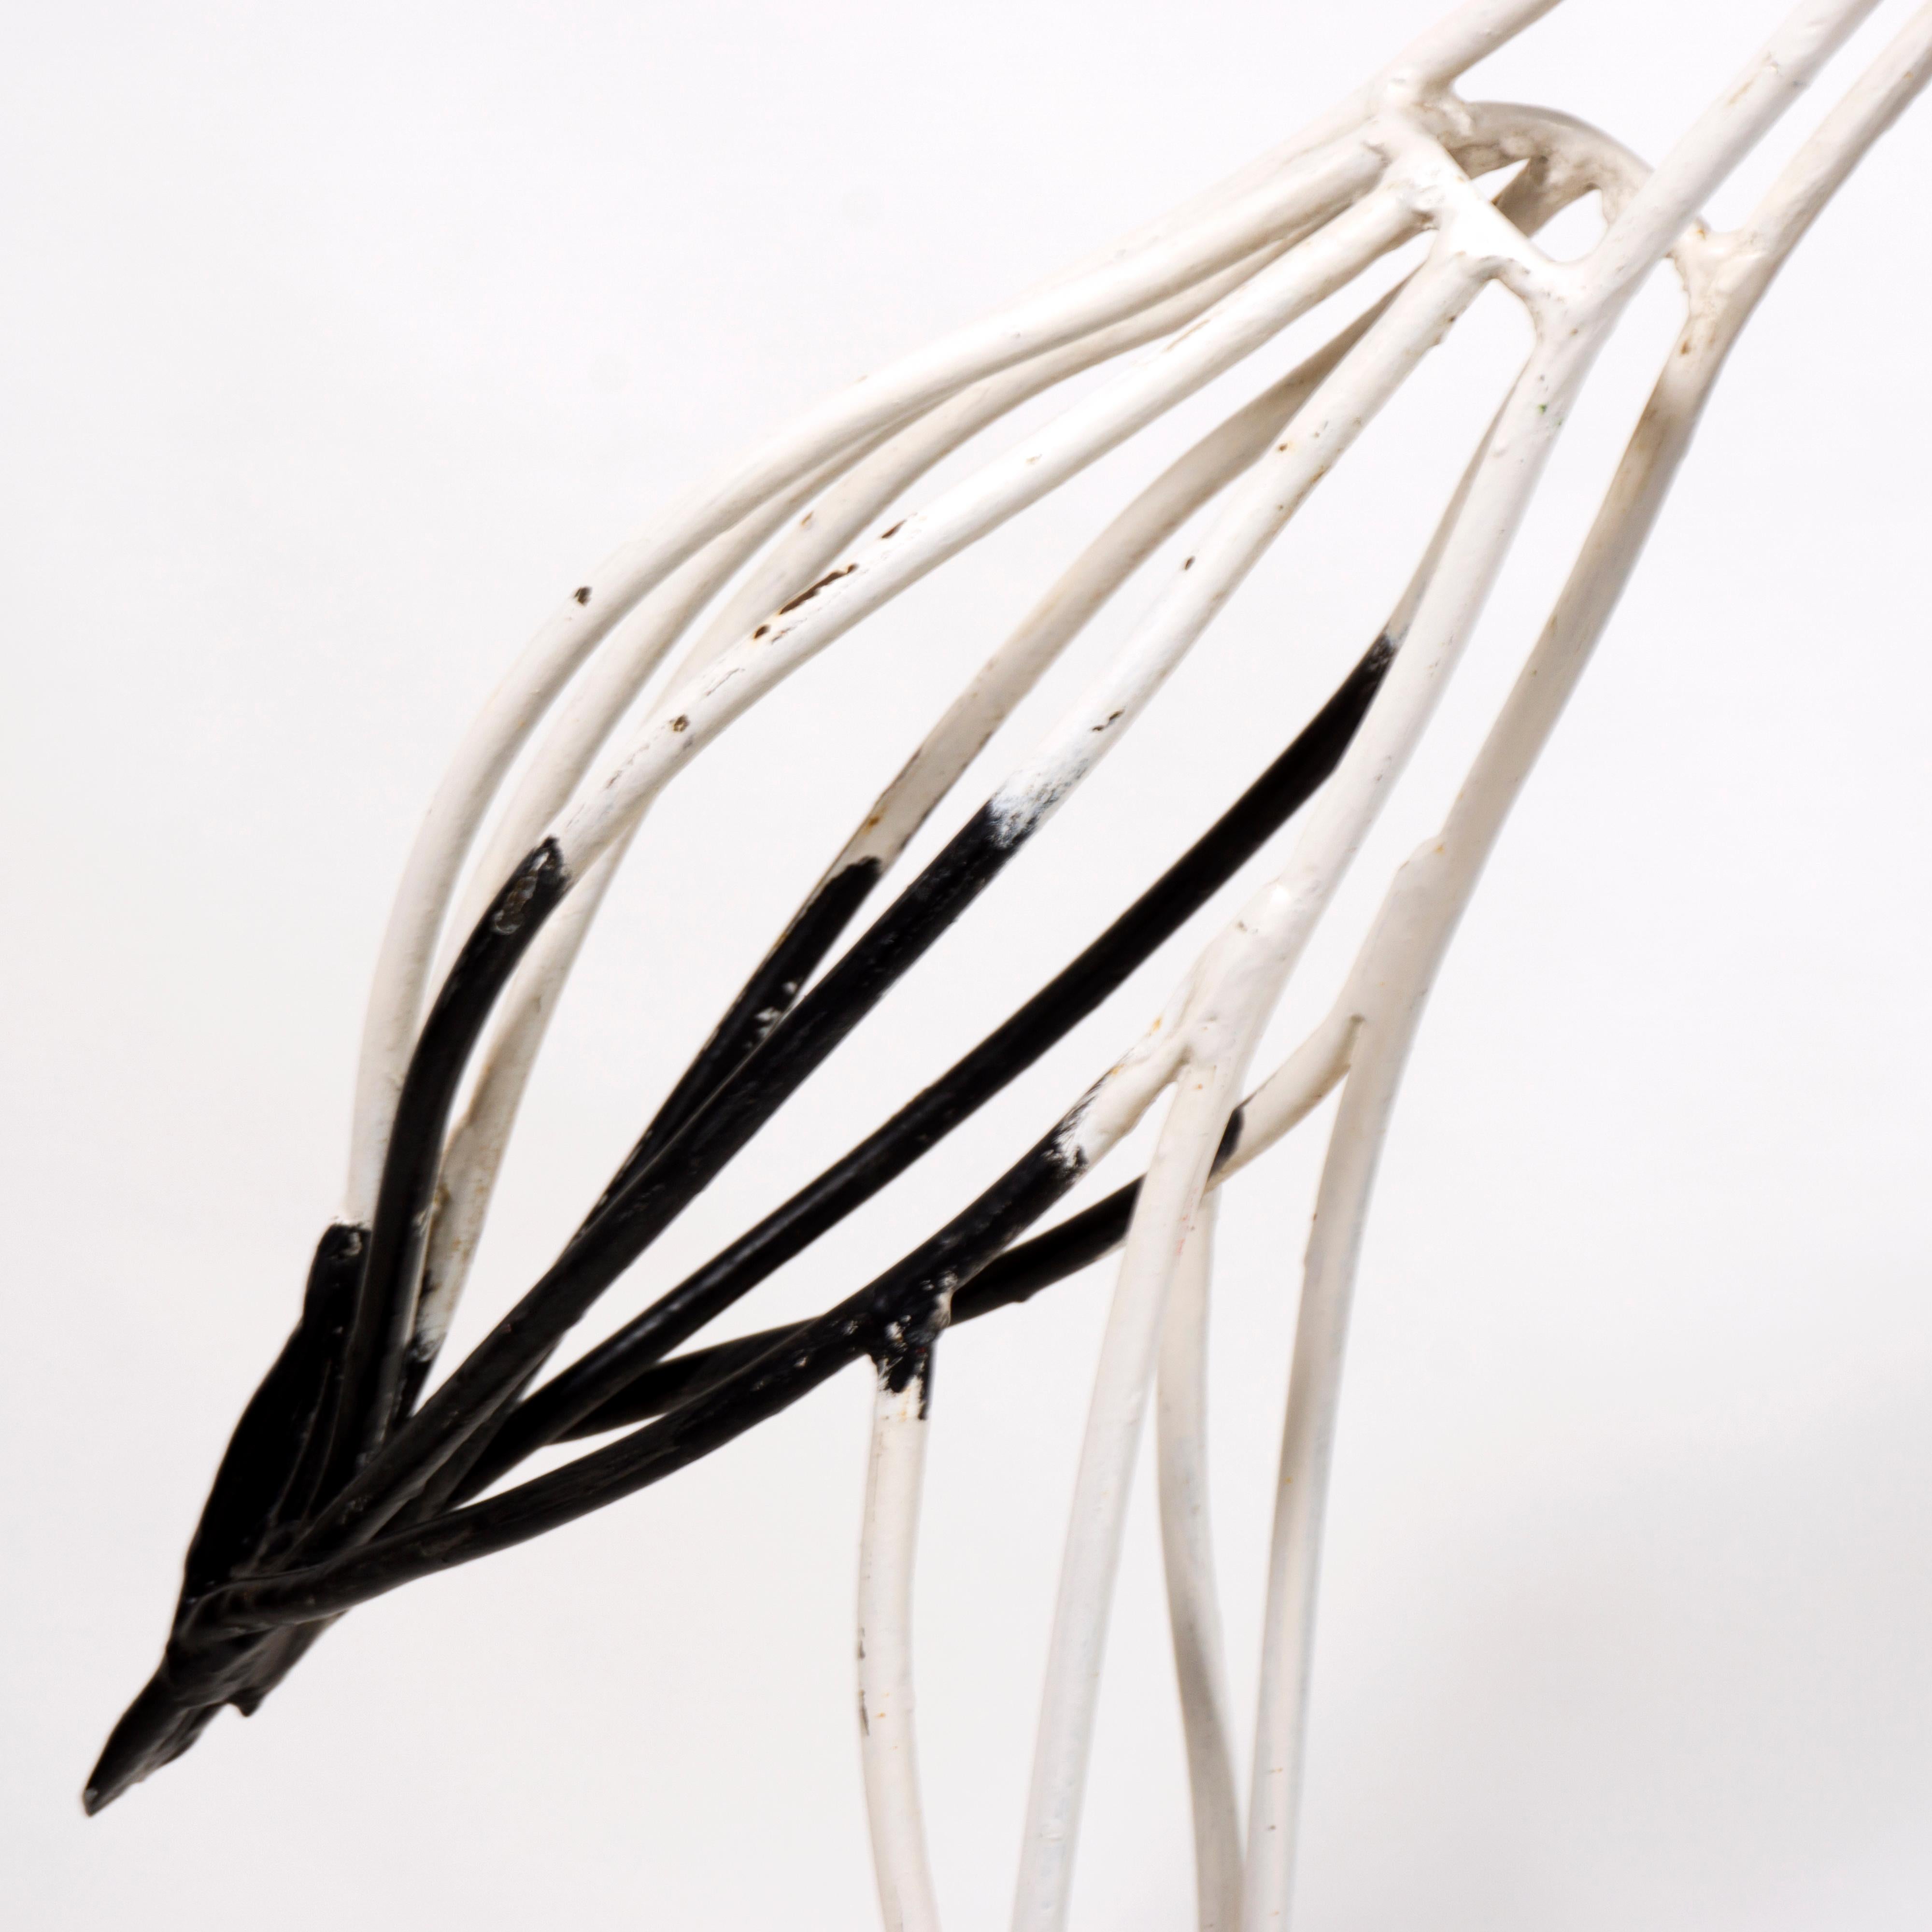 Lovely Midcentury Life-size Pair of 1950s Wrought Iron Stork Sculptures For Sale 3